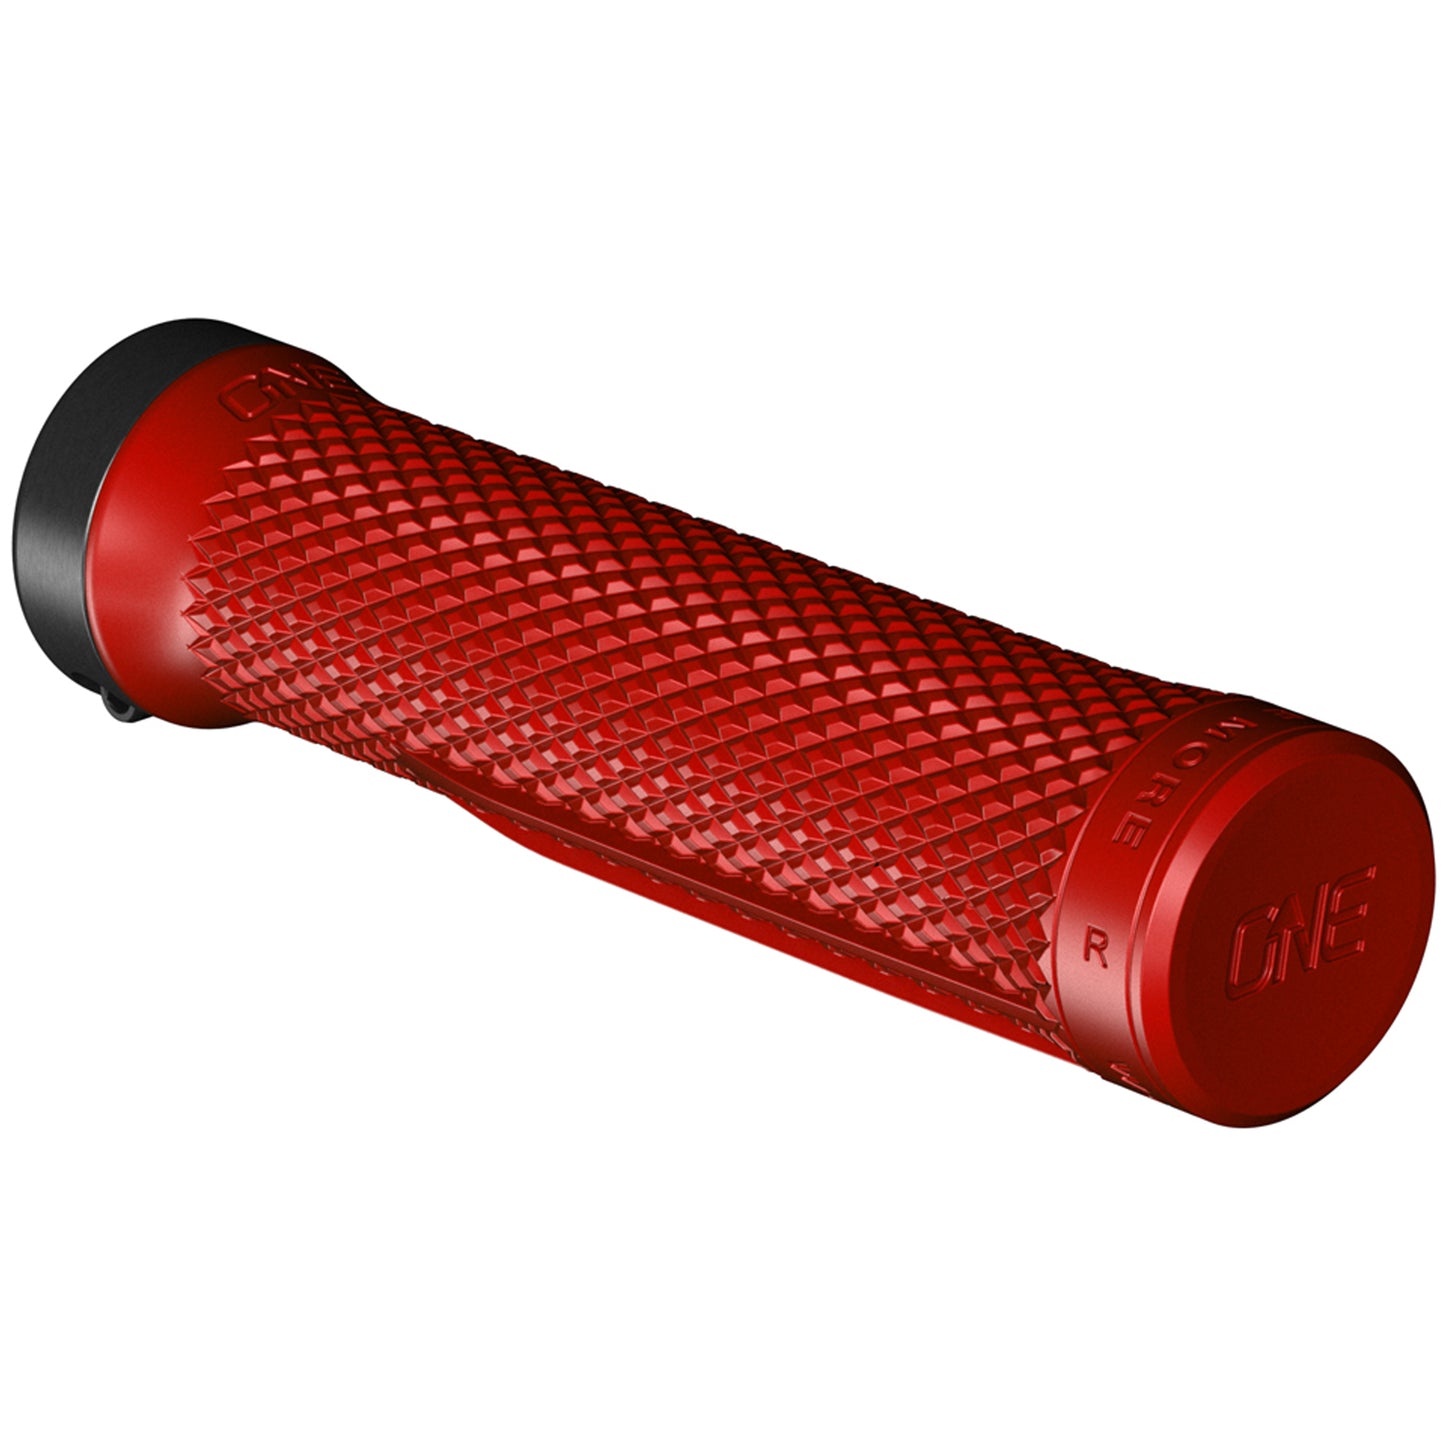 NEW OneUp Components Lock-On Grips, Red